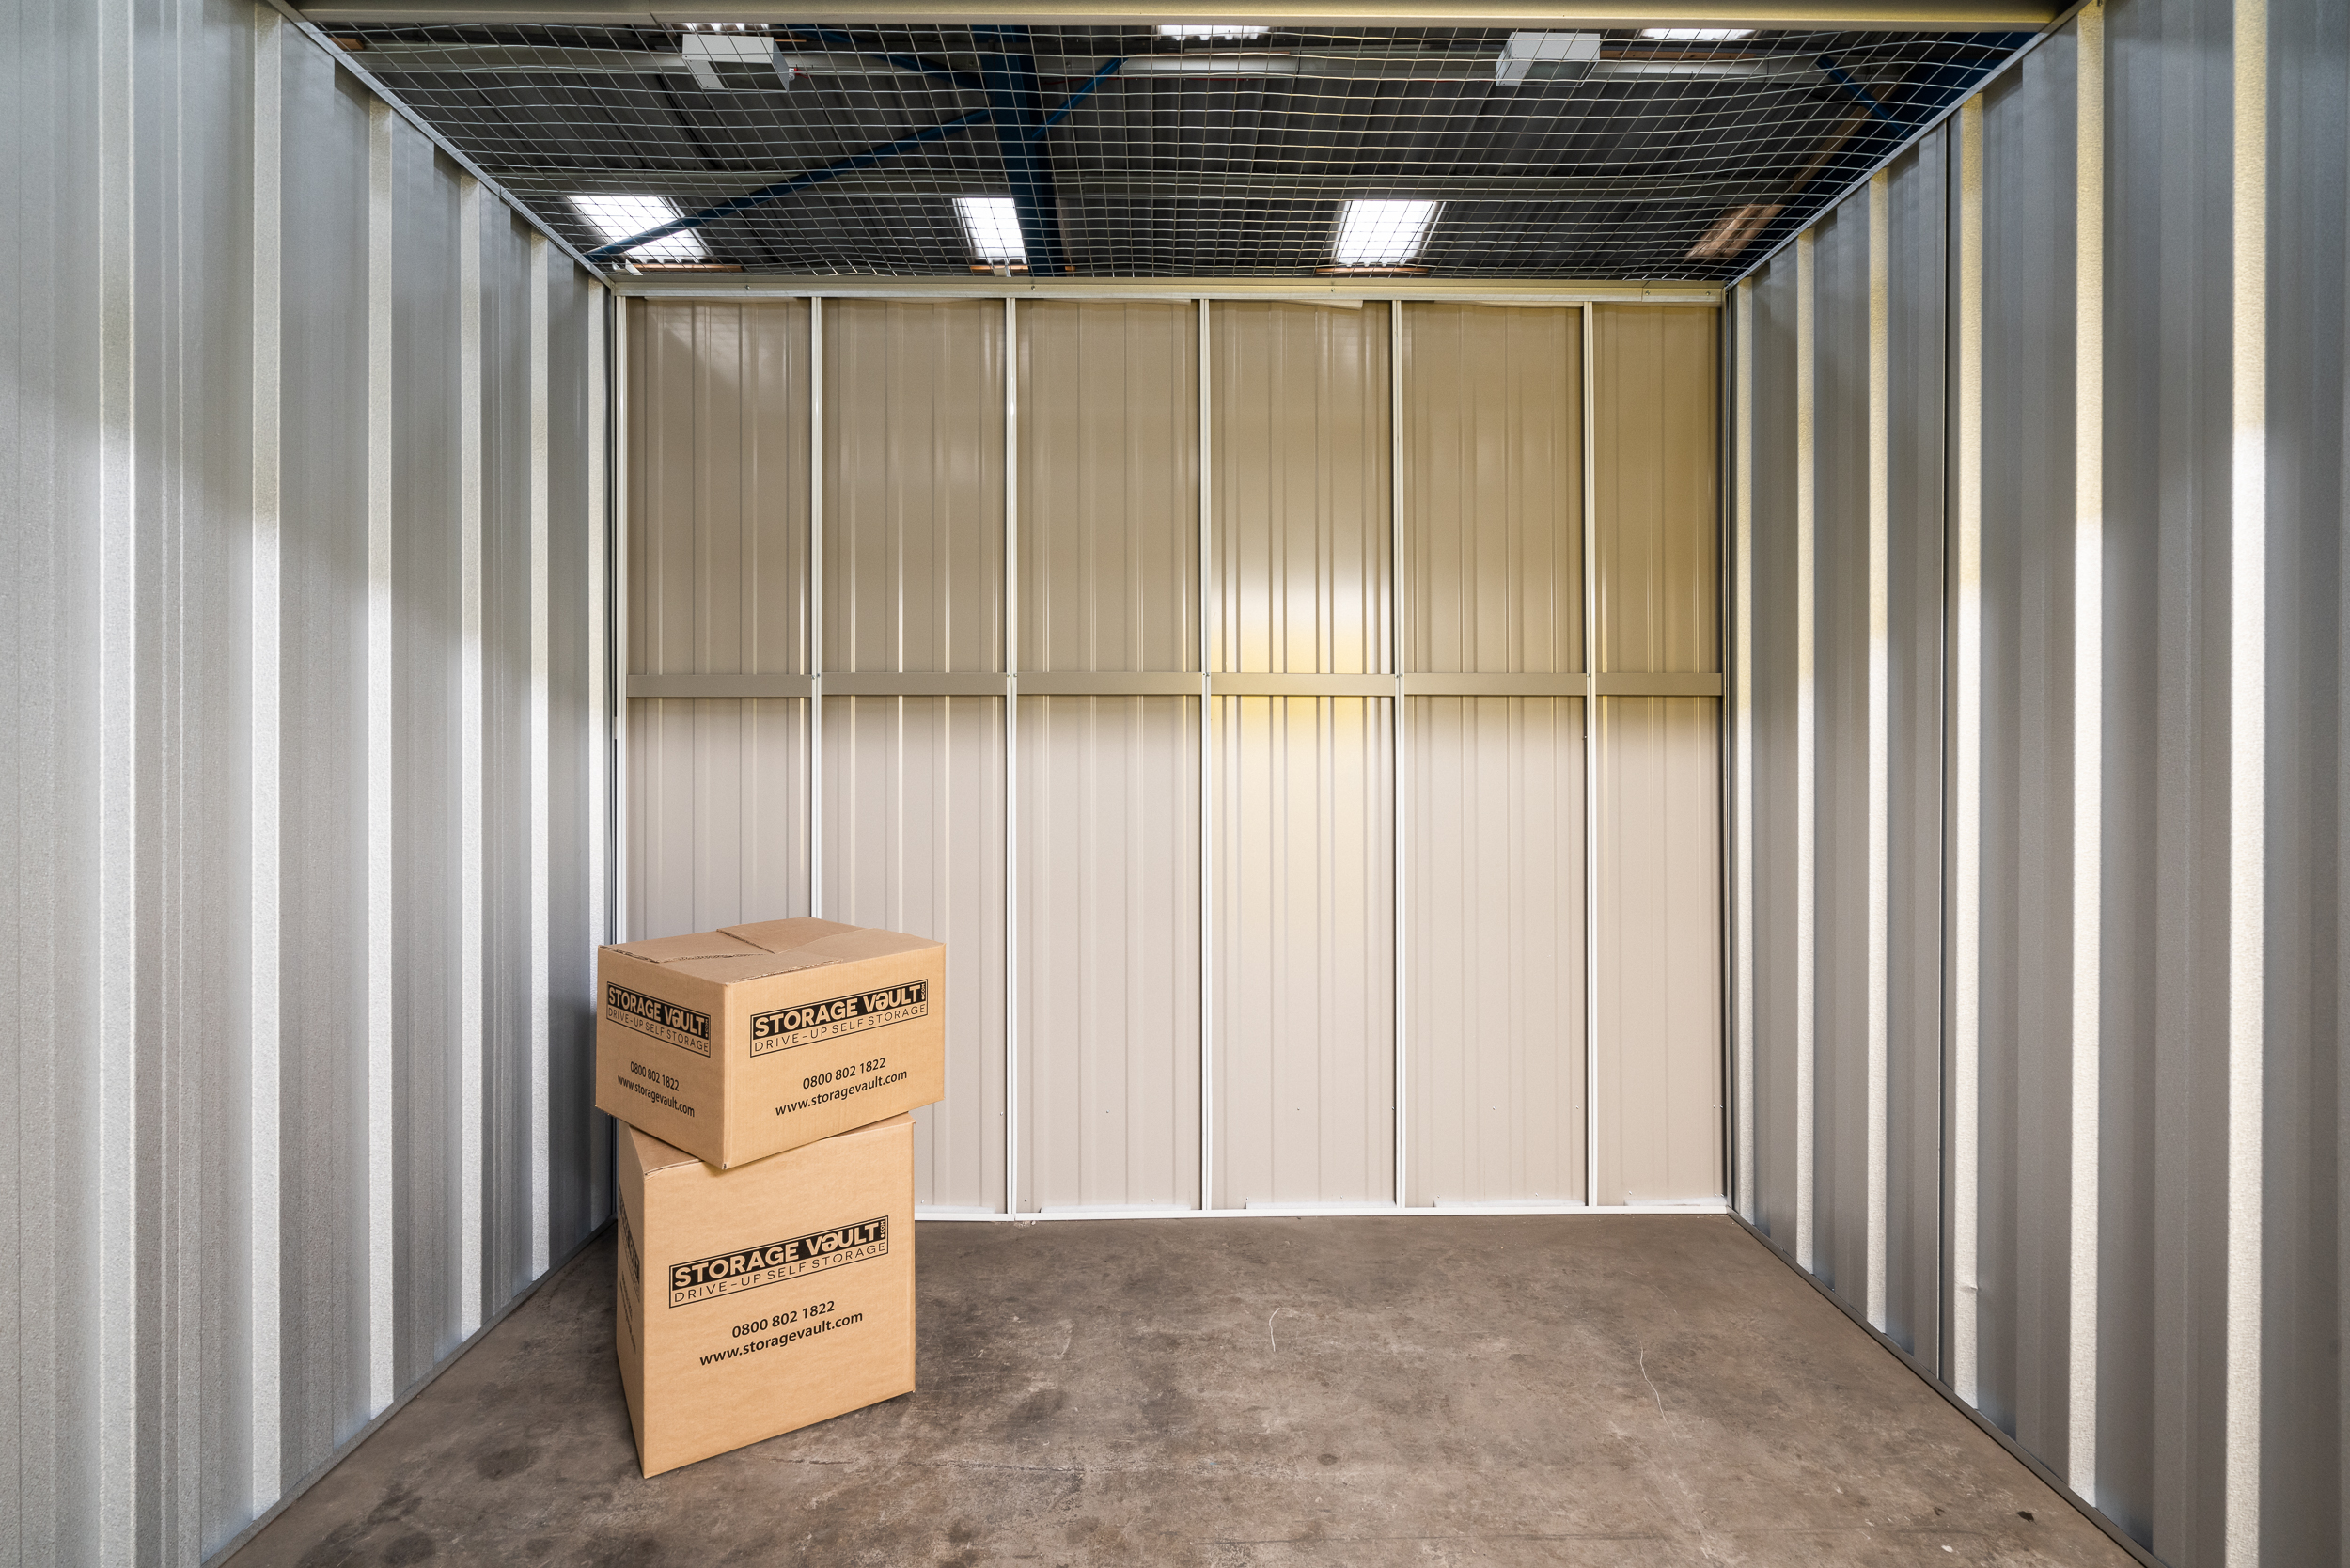 Can you work inside a storage unit